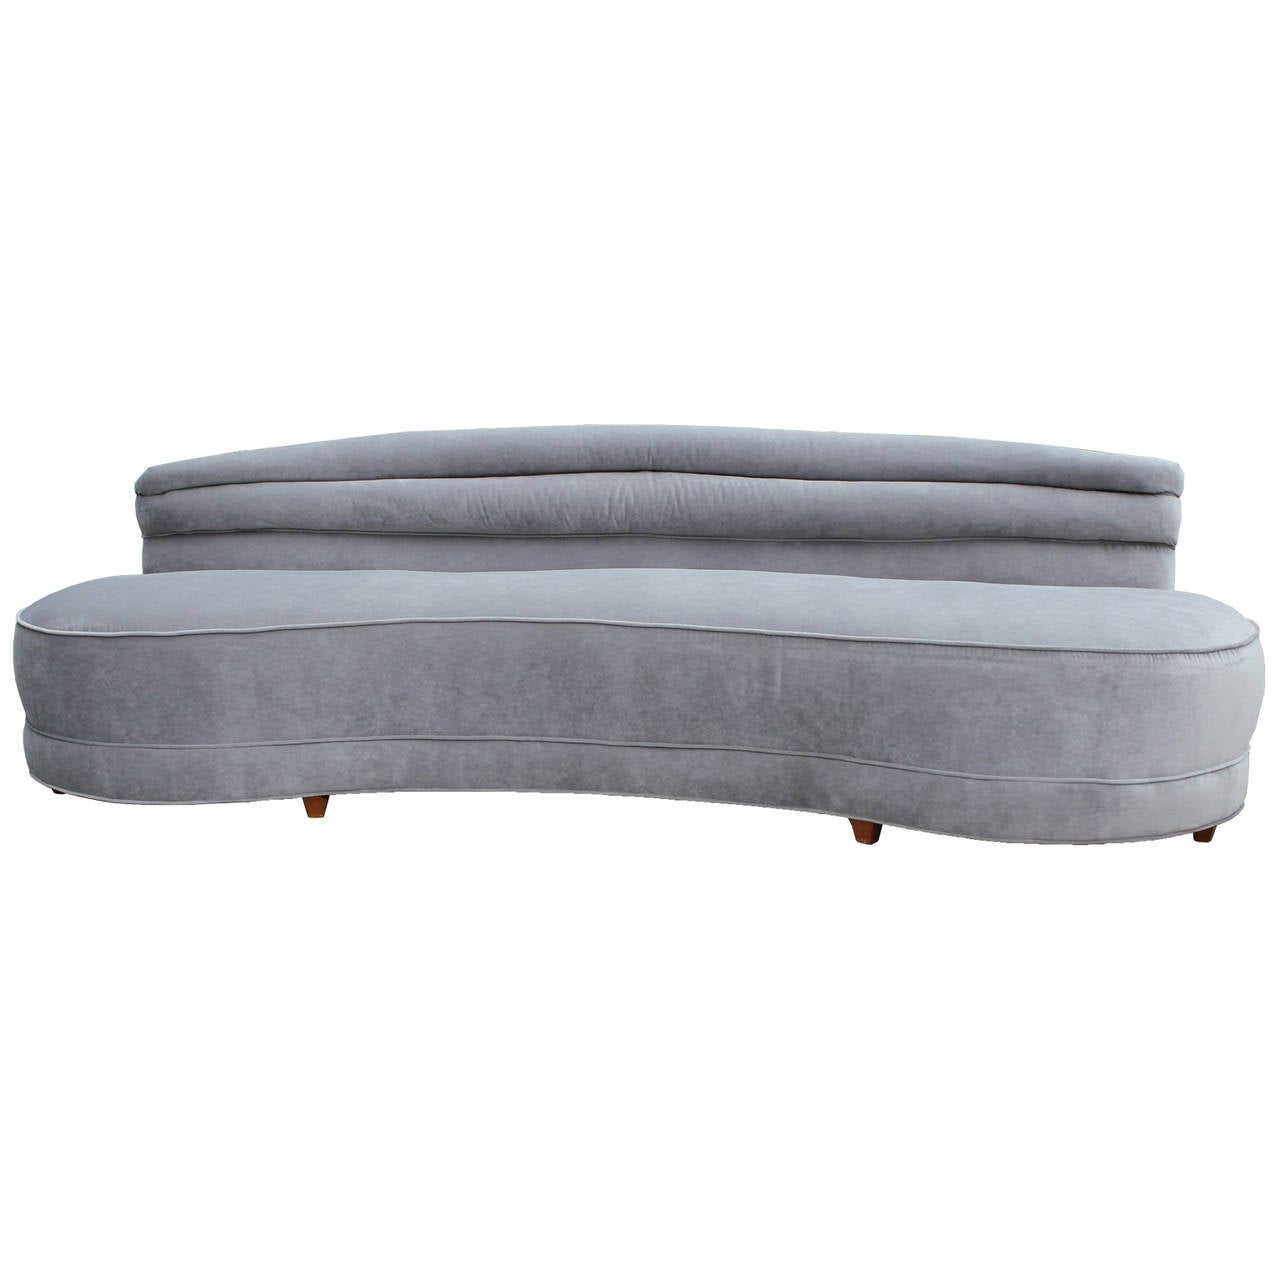 Stunning curved sofa from the 1930-1940s. Elongated bean shaped sofa is beautiful and fully refurbished. Sofa has all new foam and is covered in luxe dove grey velvet. Horizontal channel back adds visual interest.